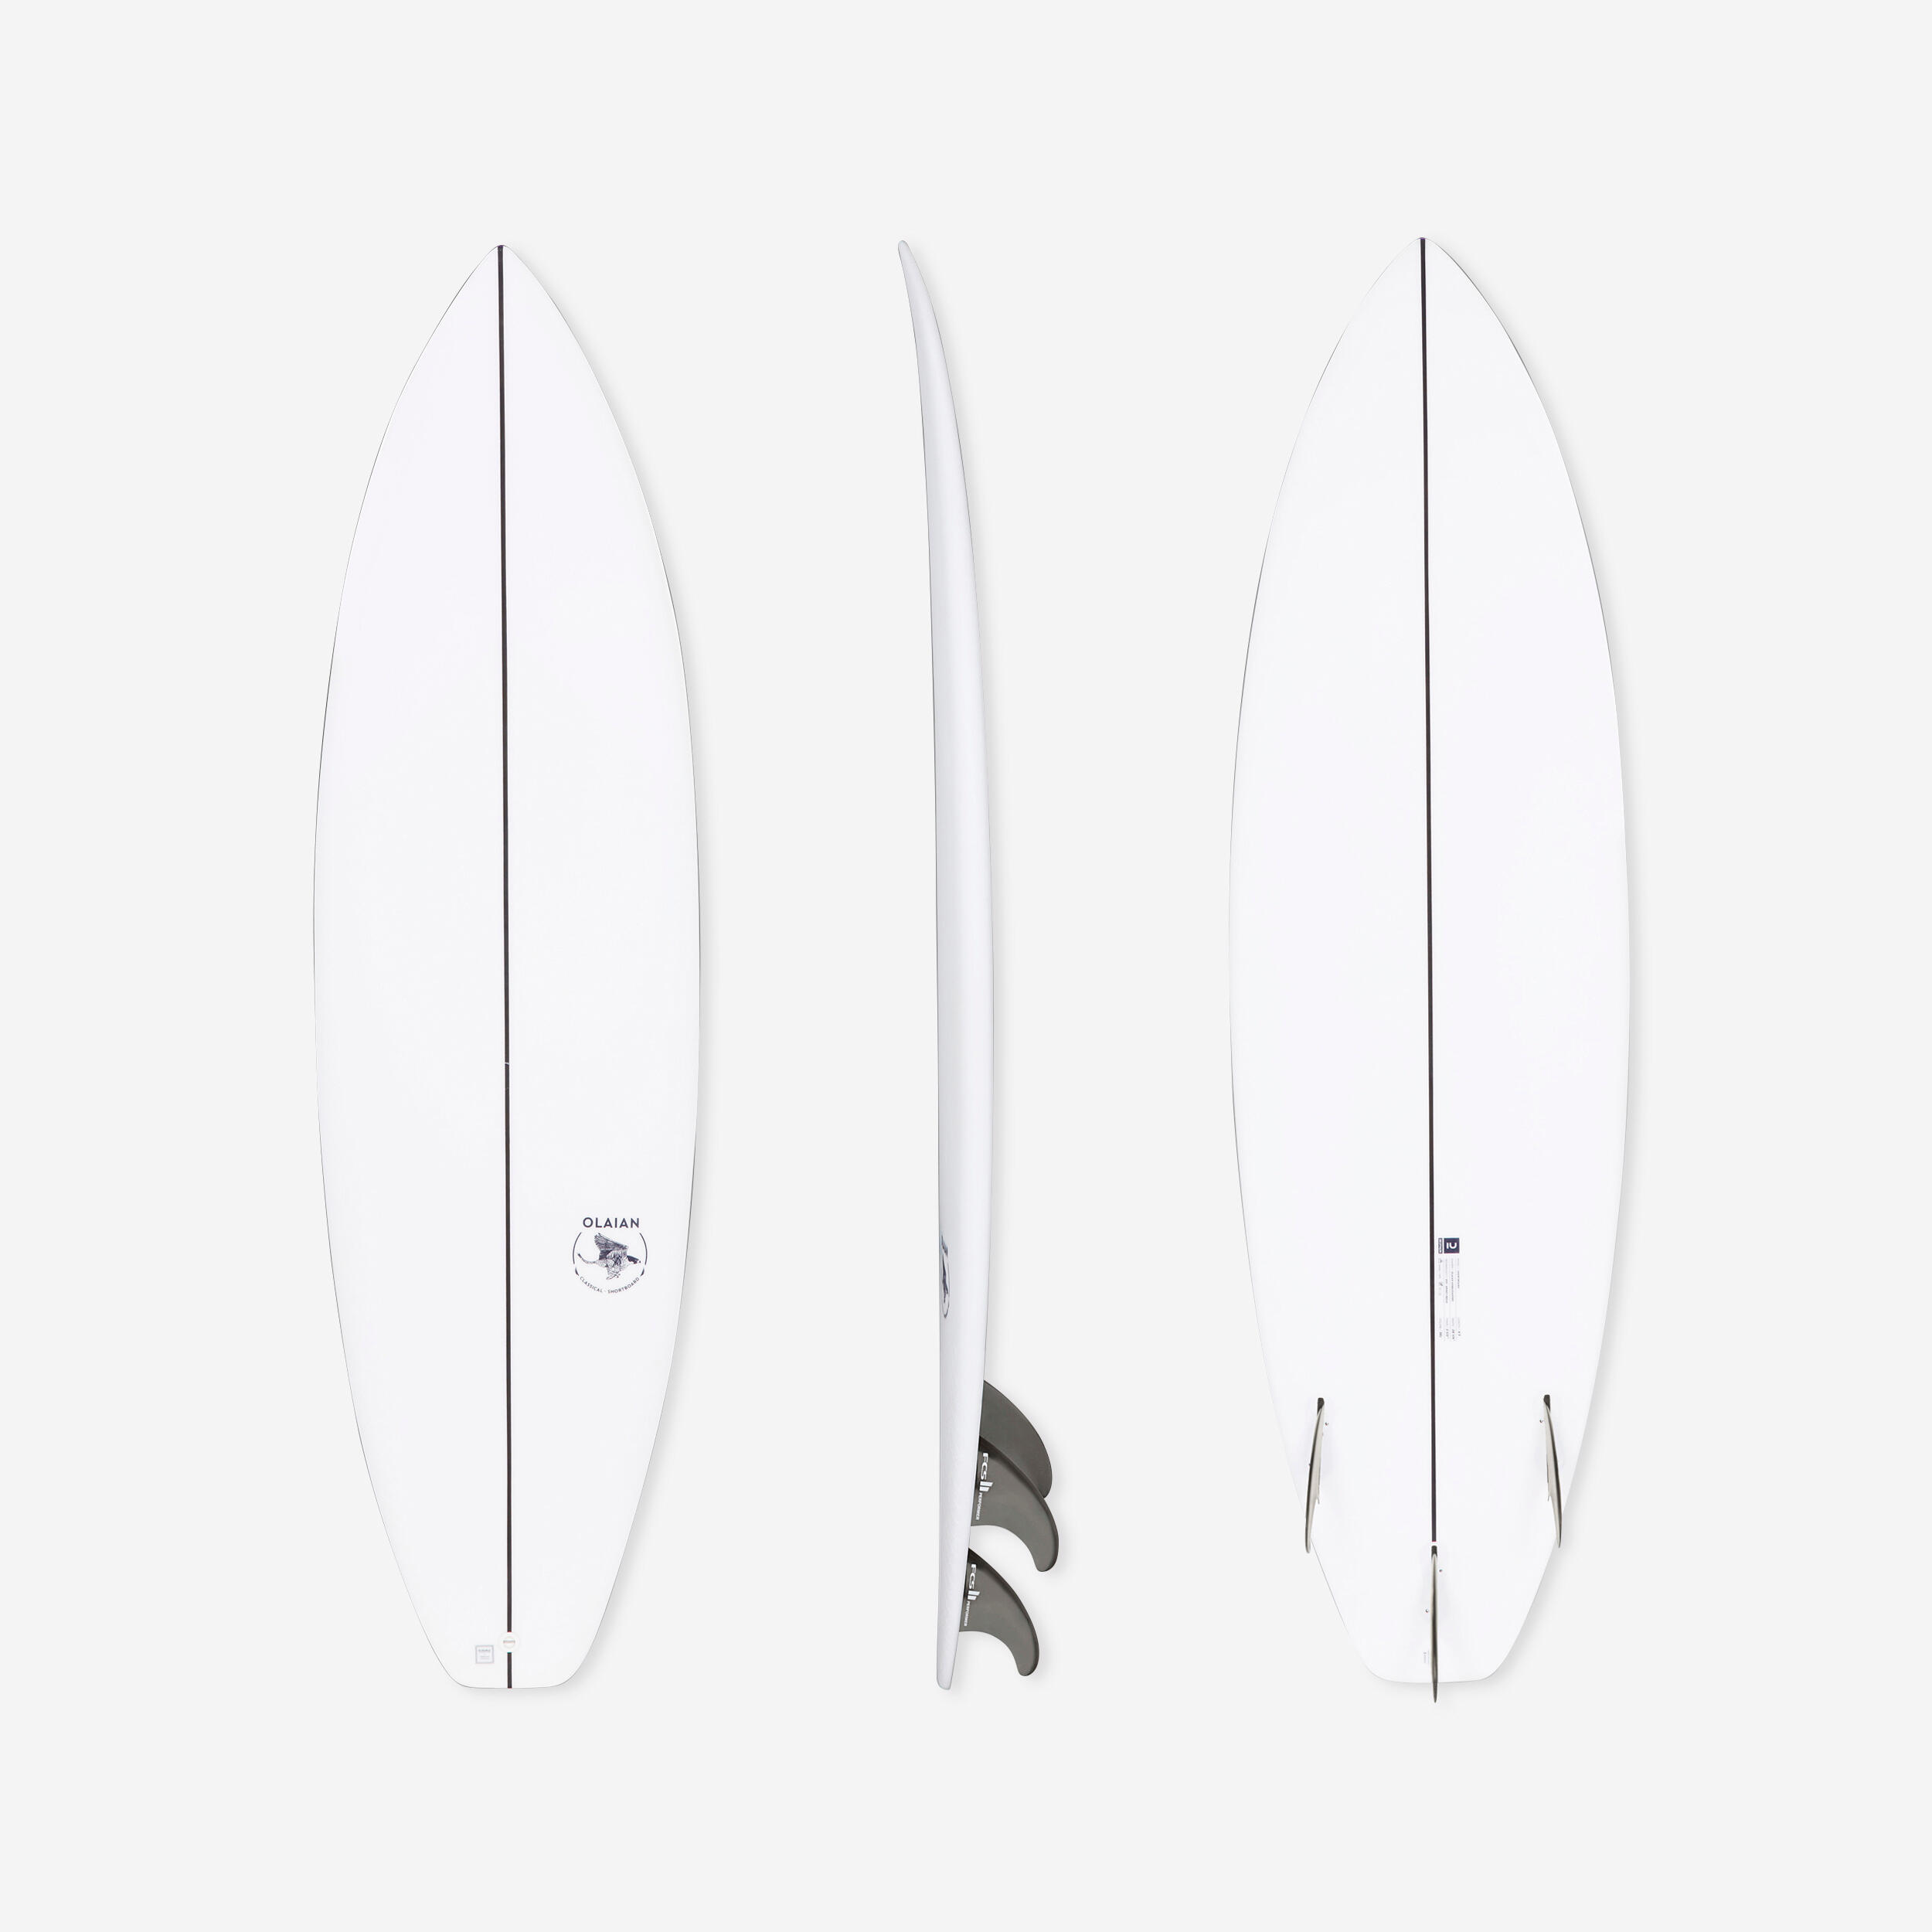 OLAIAN SHORTBOARD 900 6'3" 35 L. Supplied with 3 FCS2 fins